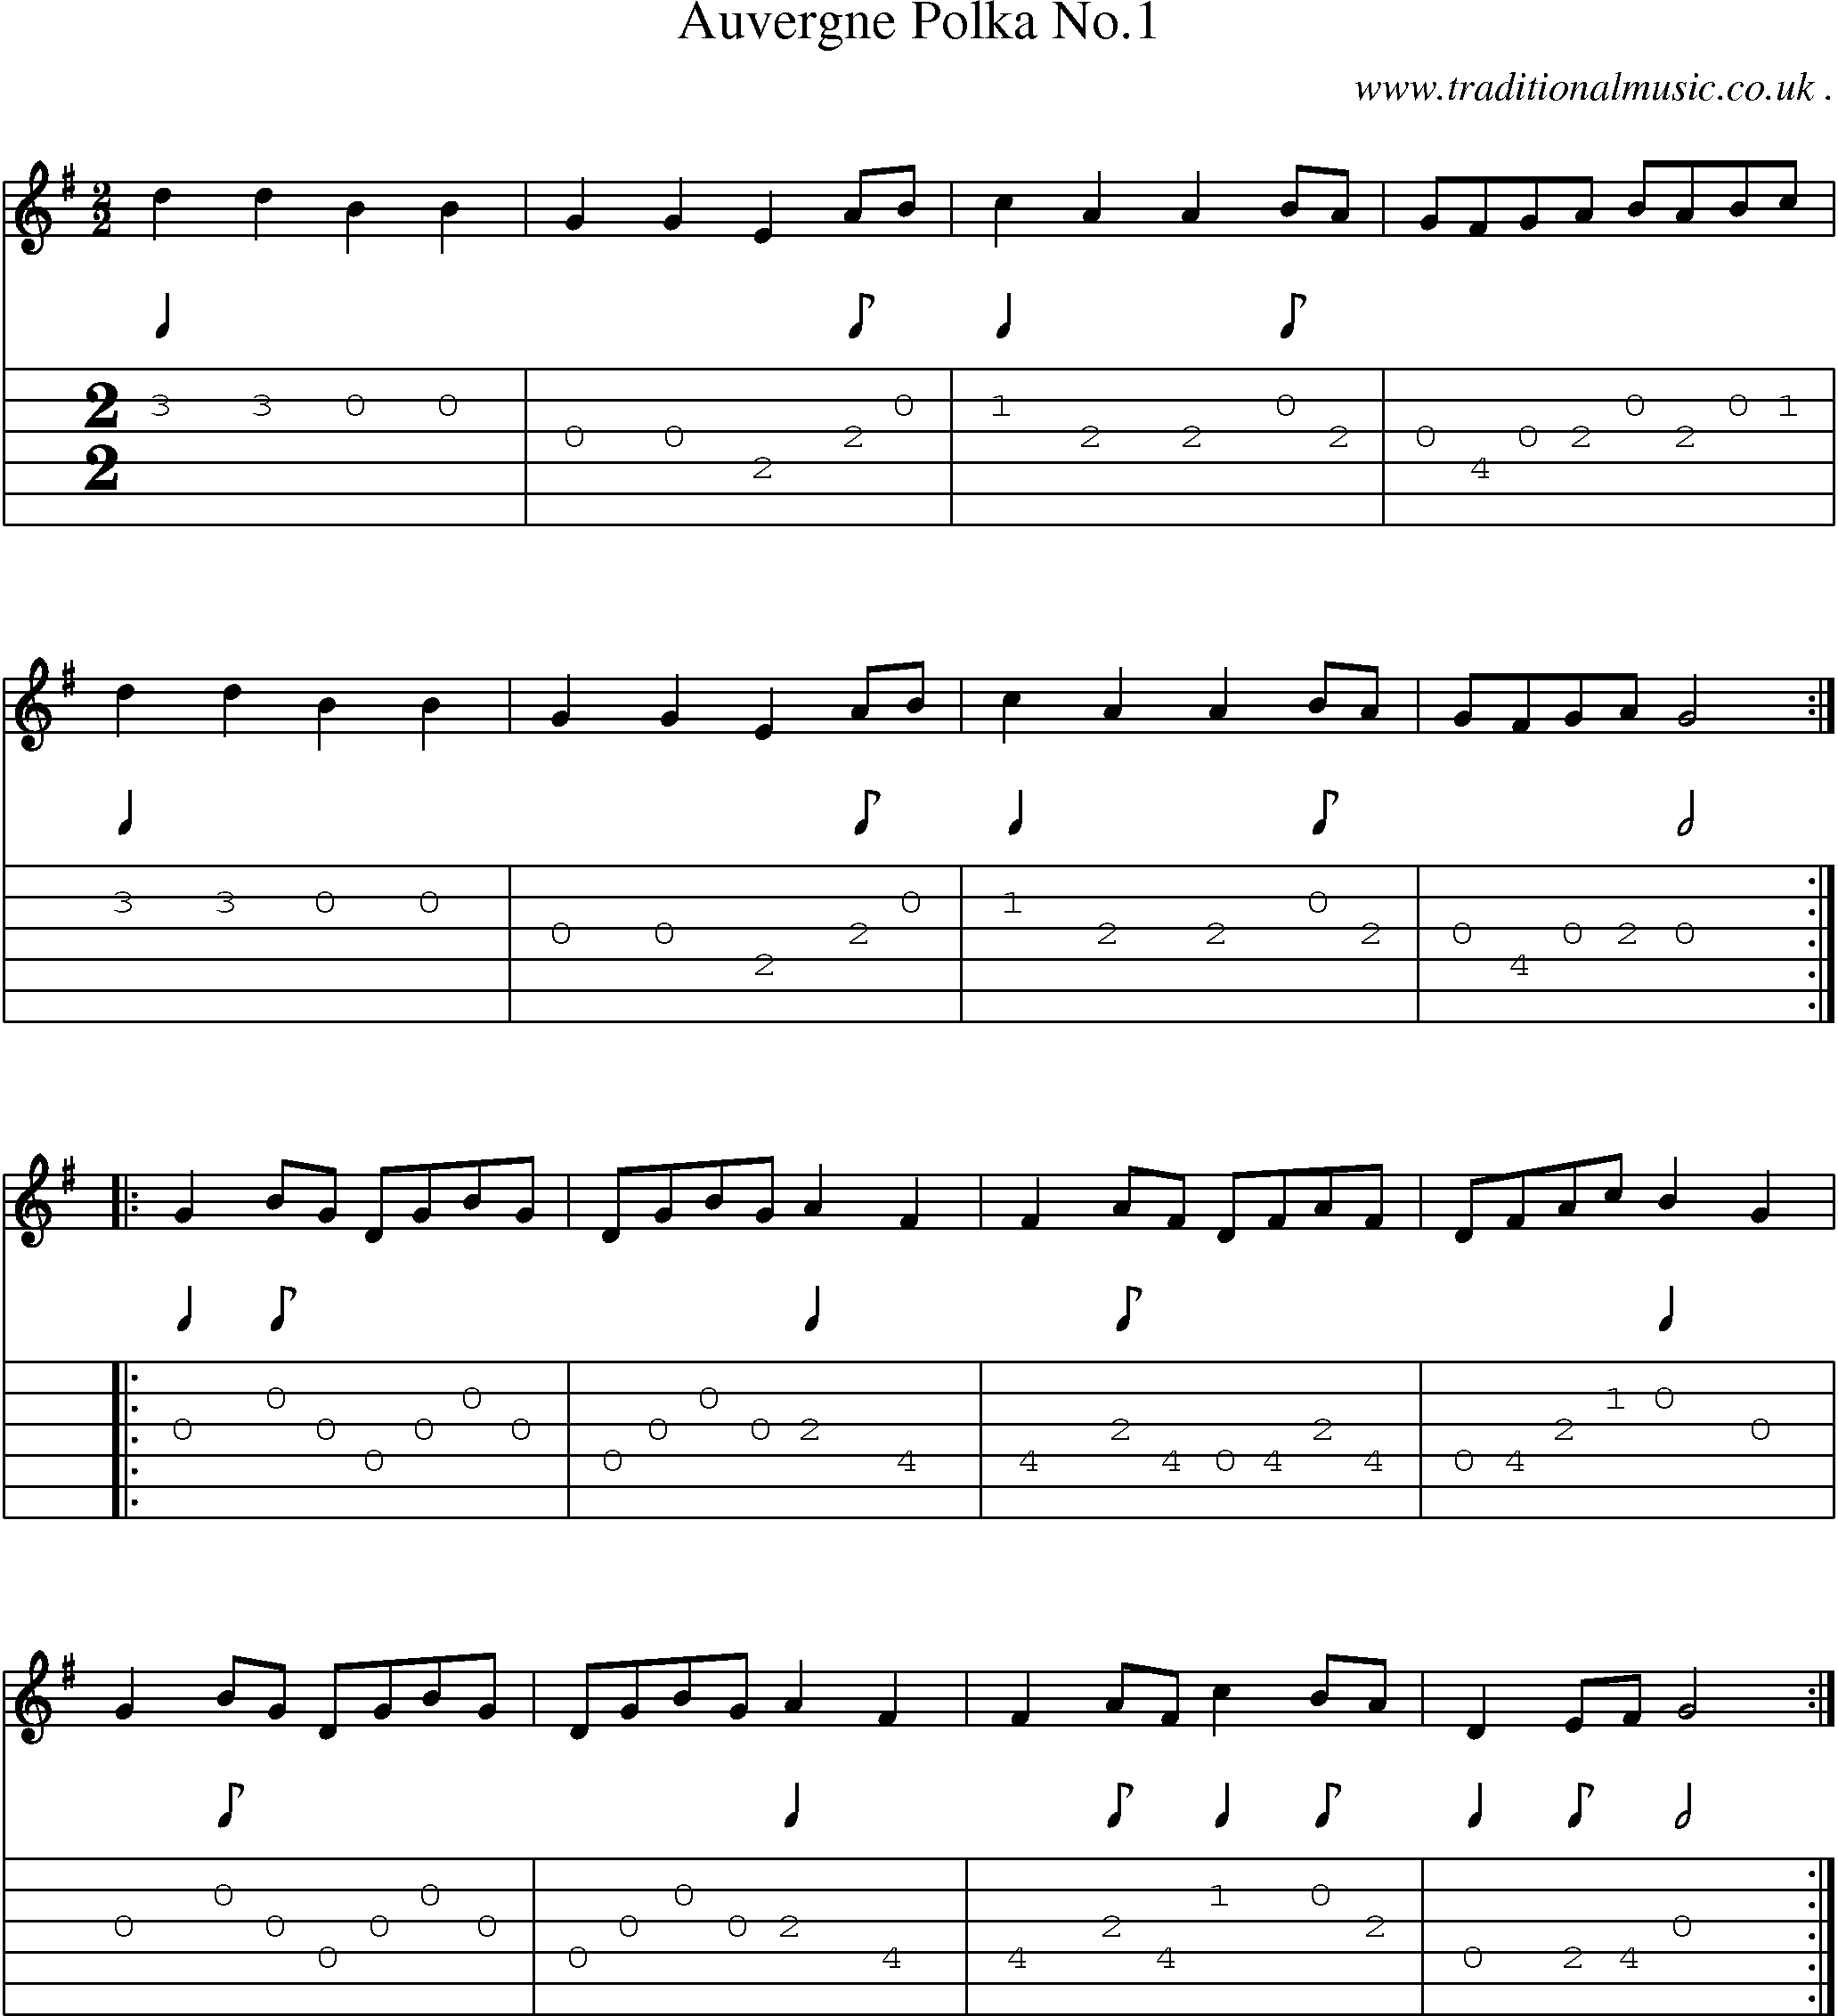 Sheet-Music and Guitar Tabs for Auvergne Polka No1